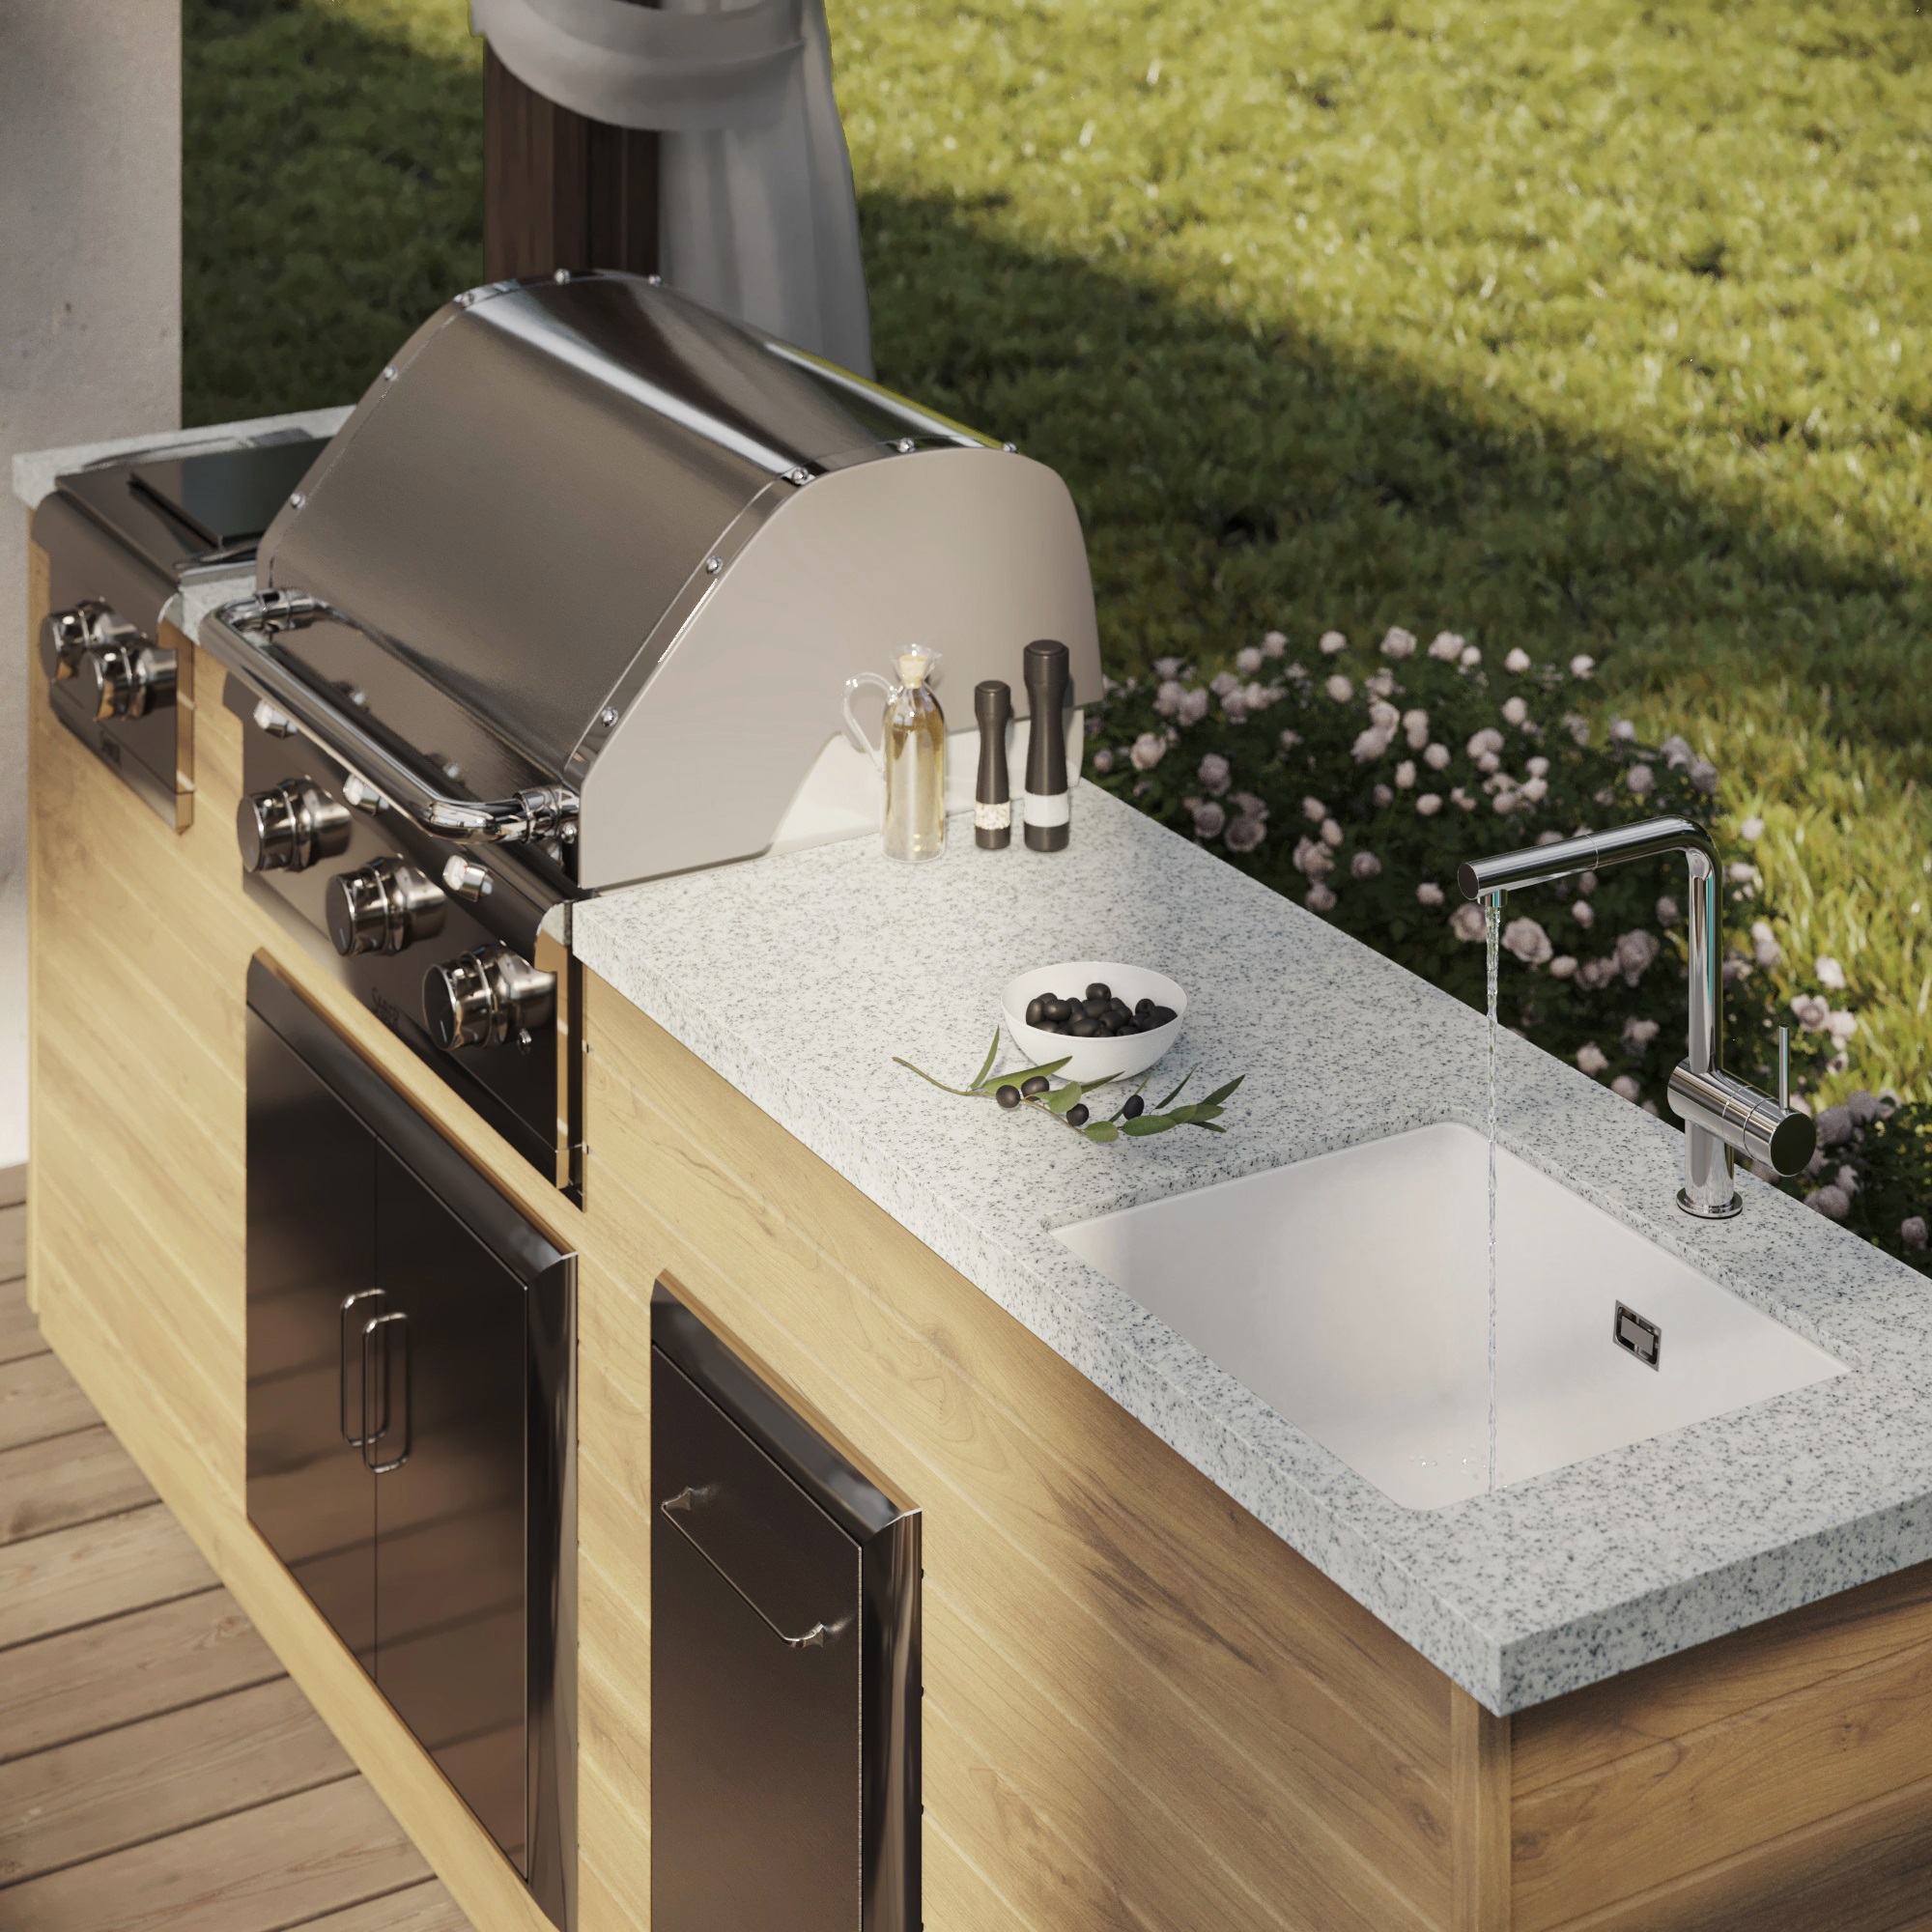 When installing heavy appliances like grills or ovens in your outdoor kitchen, choose durable materials.